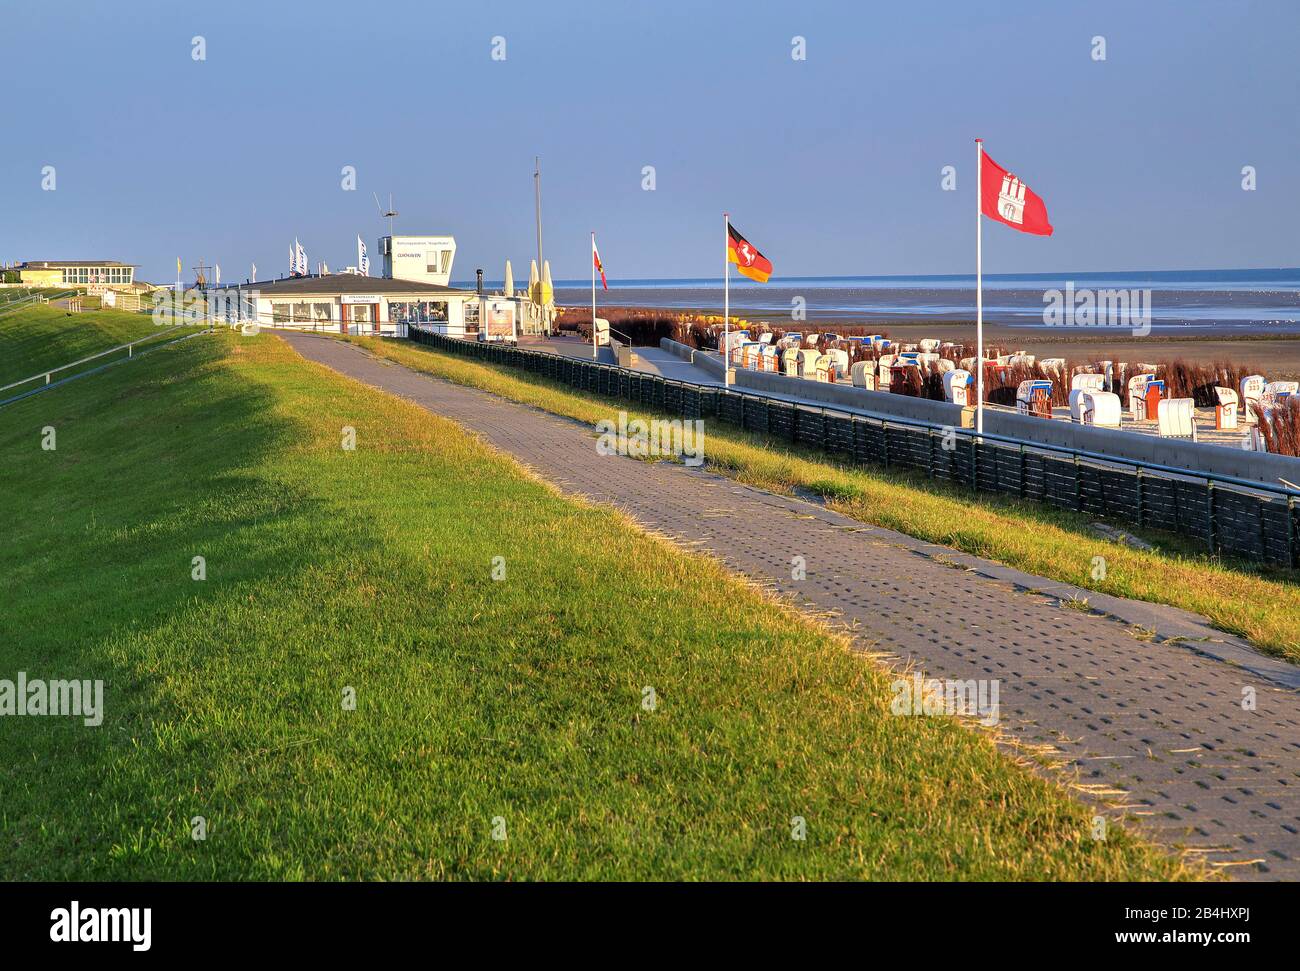 Dike promenade with beach and beach chairs in the district Döse, North Sea resort Cuxhaven, Elbe estuary, North Sea, North Sea coast, Lower Saxony, Germany Stock Photo